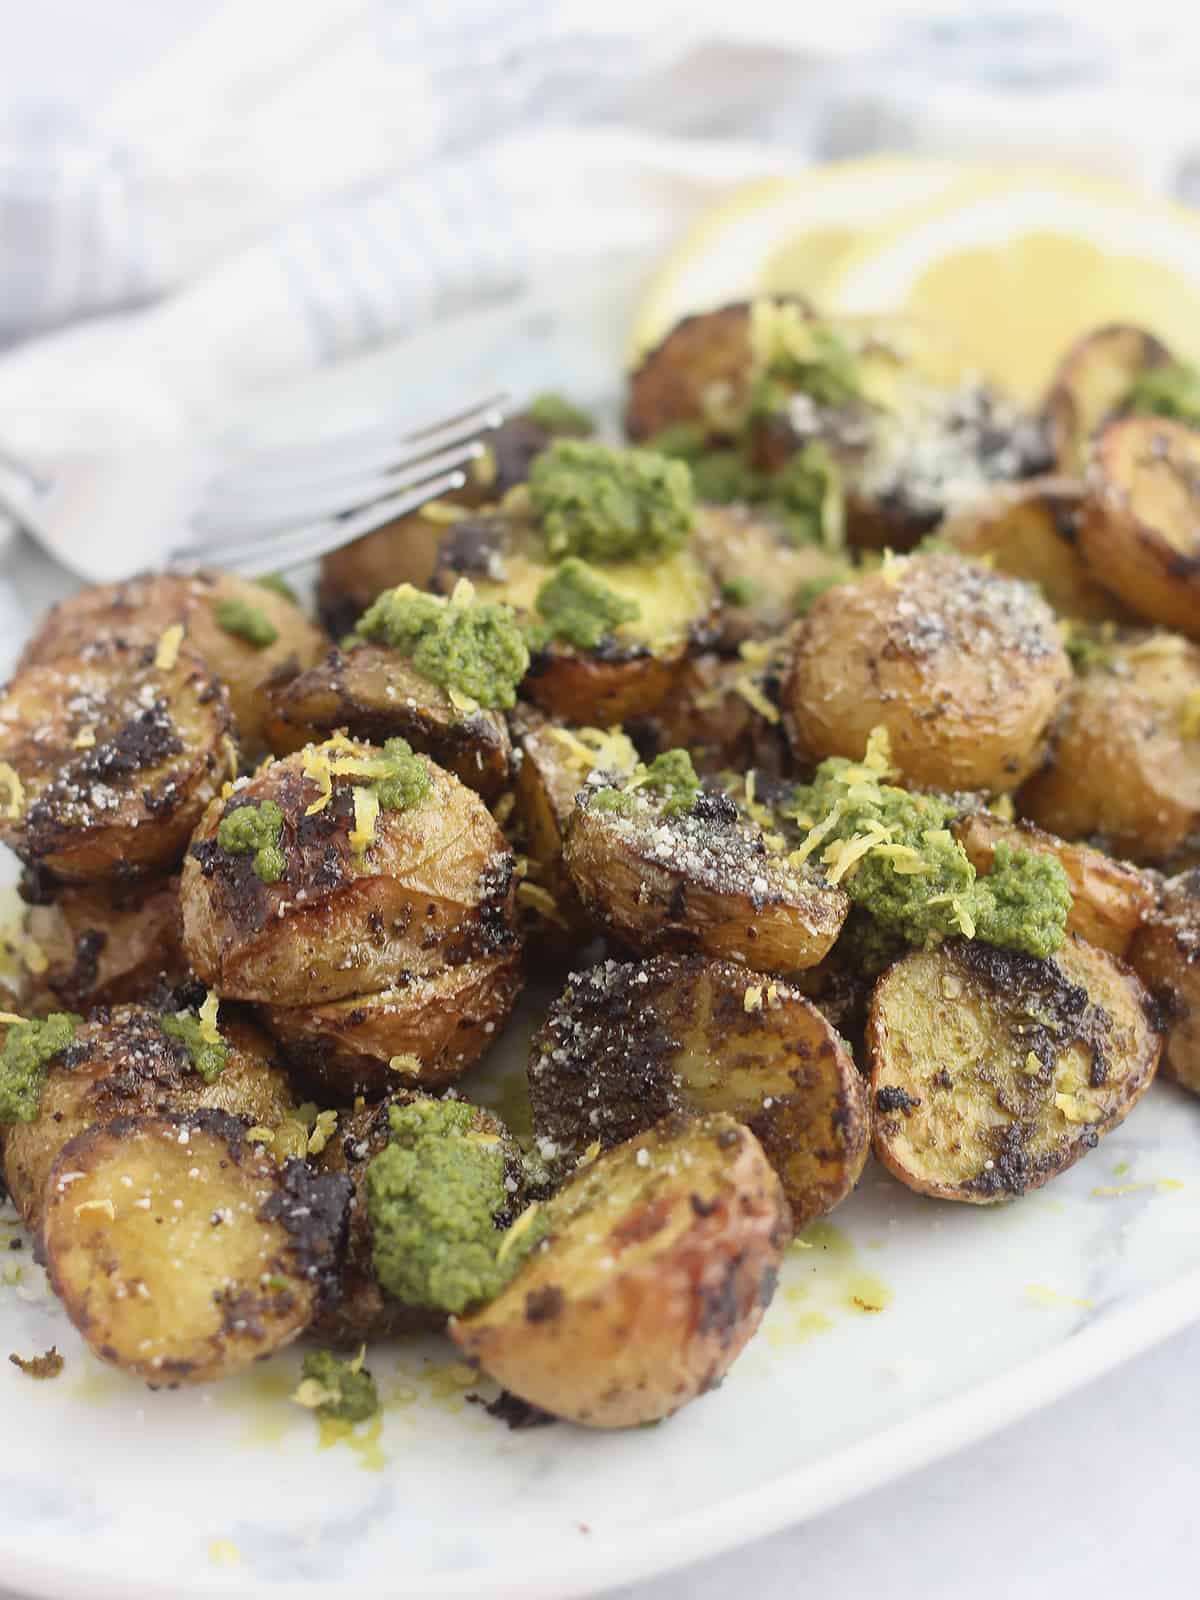 Roasted baby potatoes on a serving plate with lemon slices.